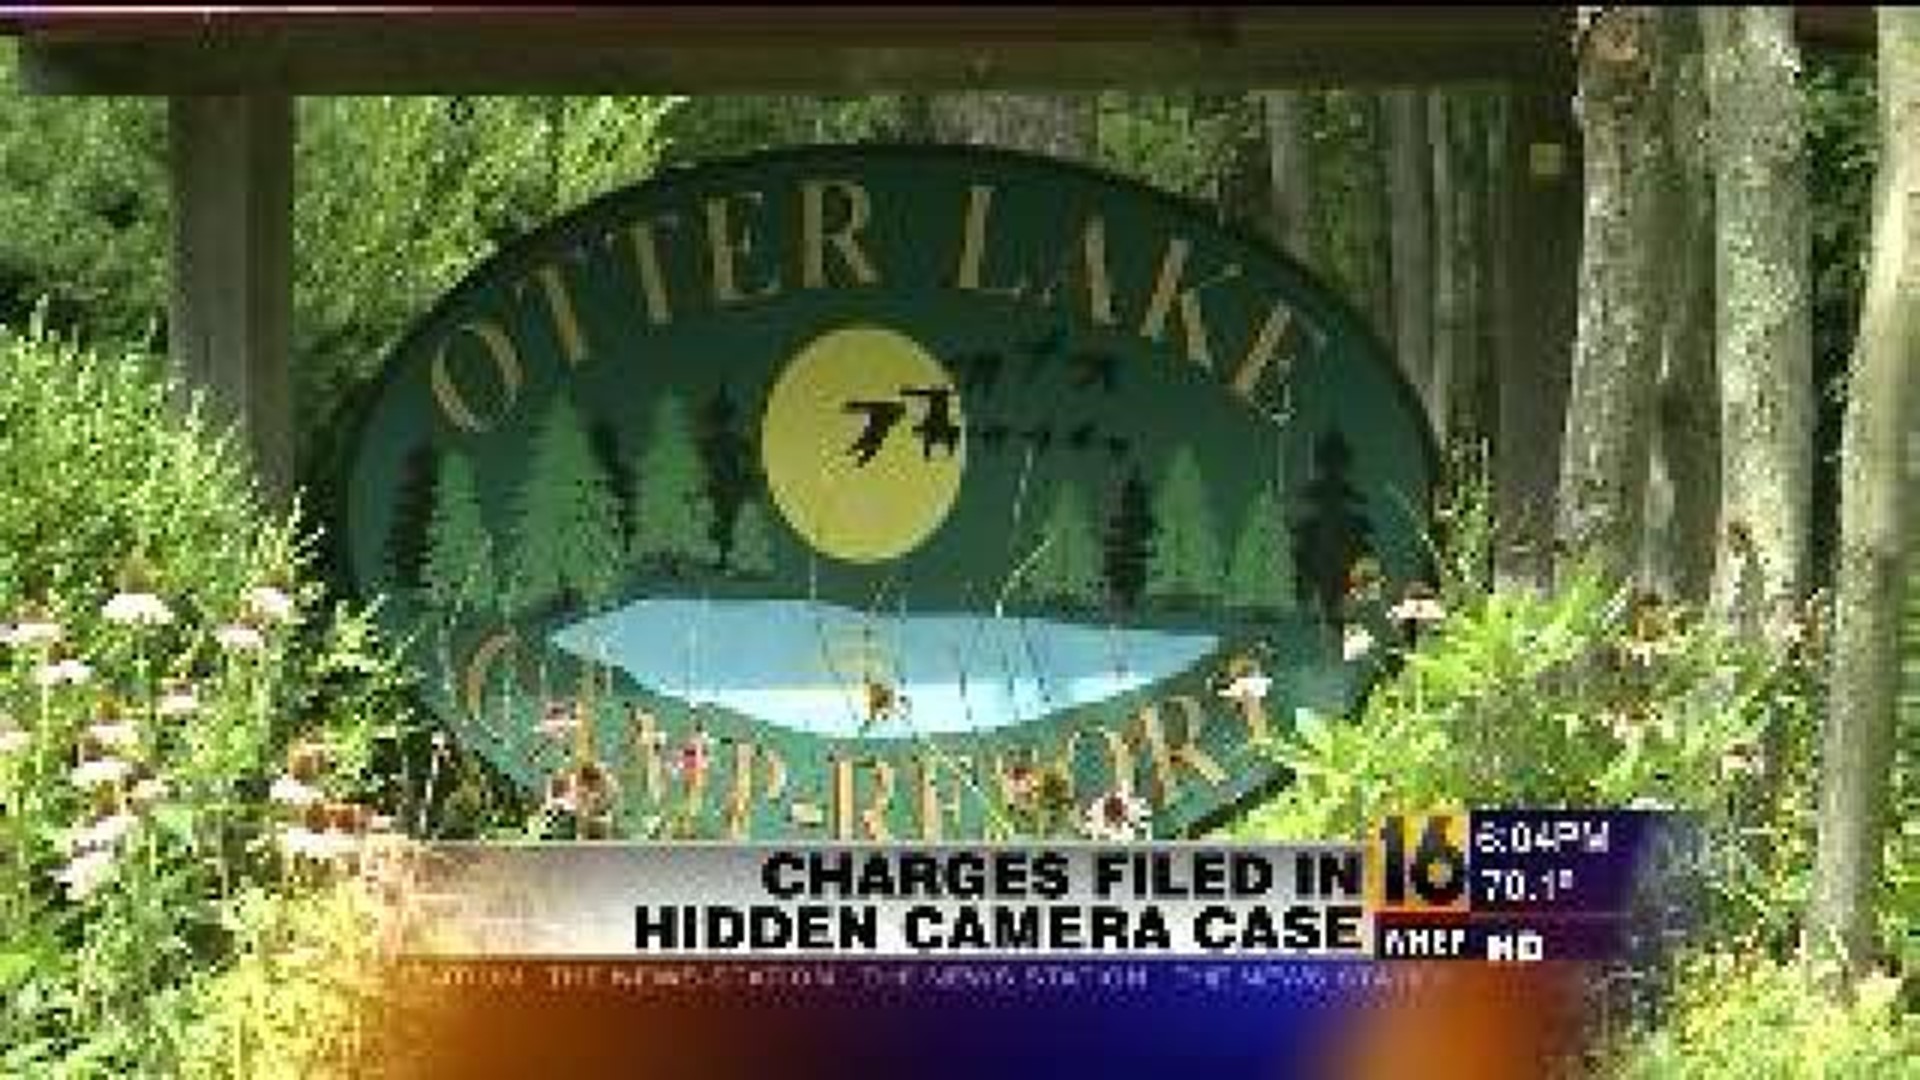 NJ Man Charged For Campground Cameras